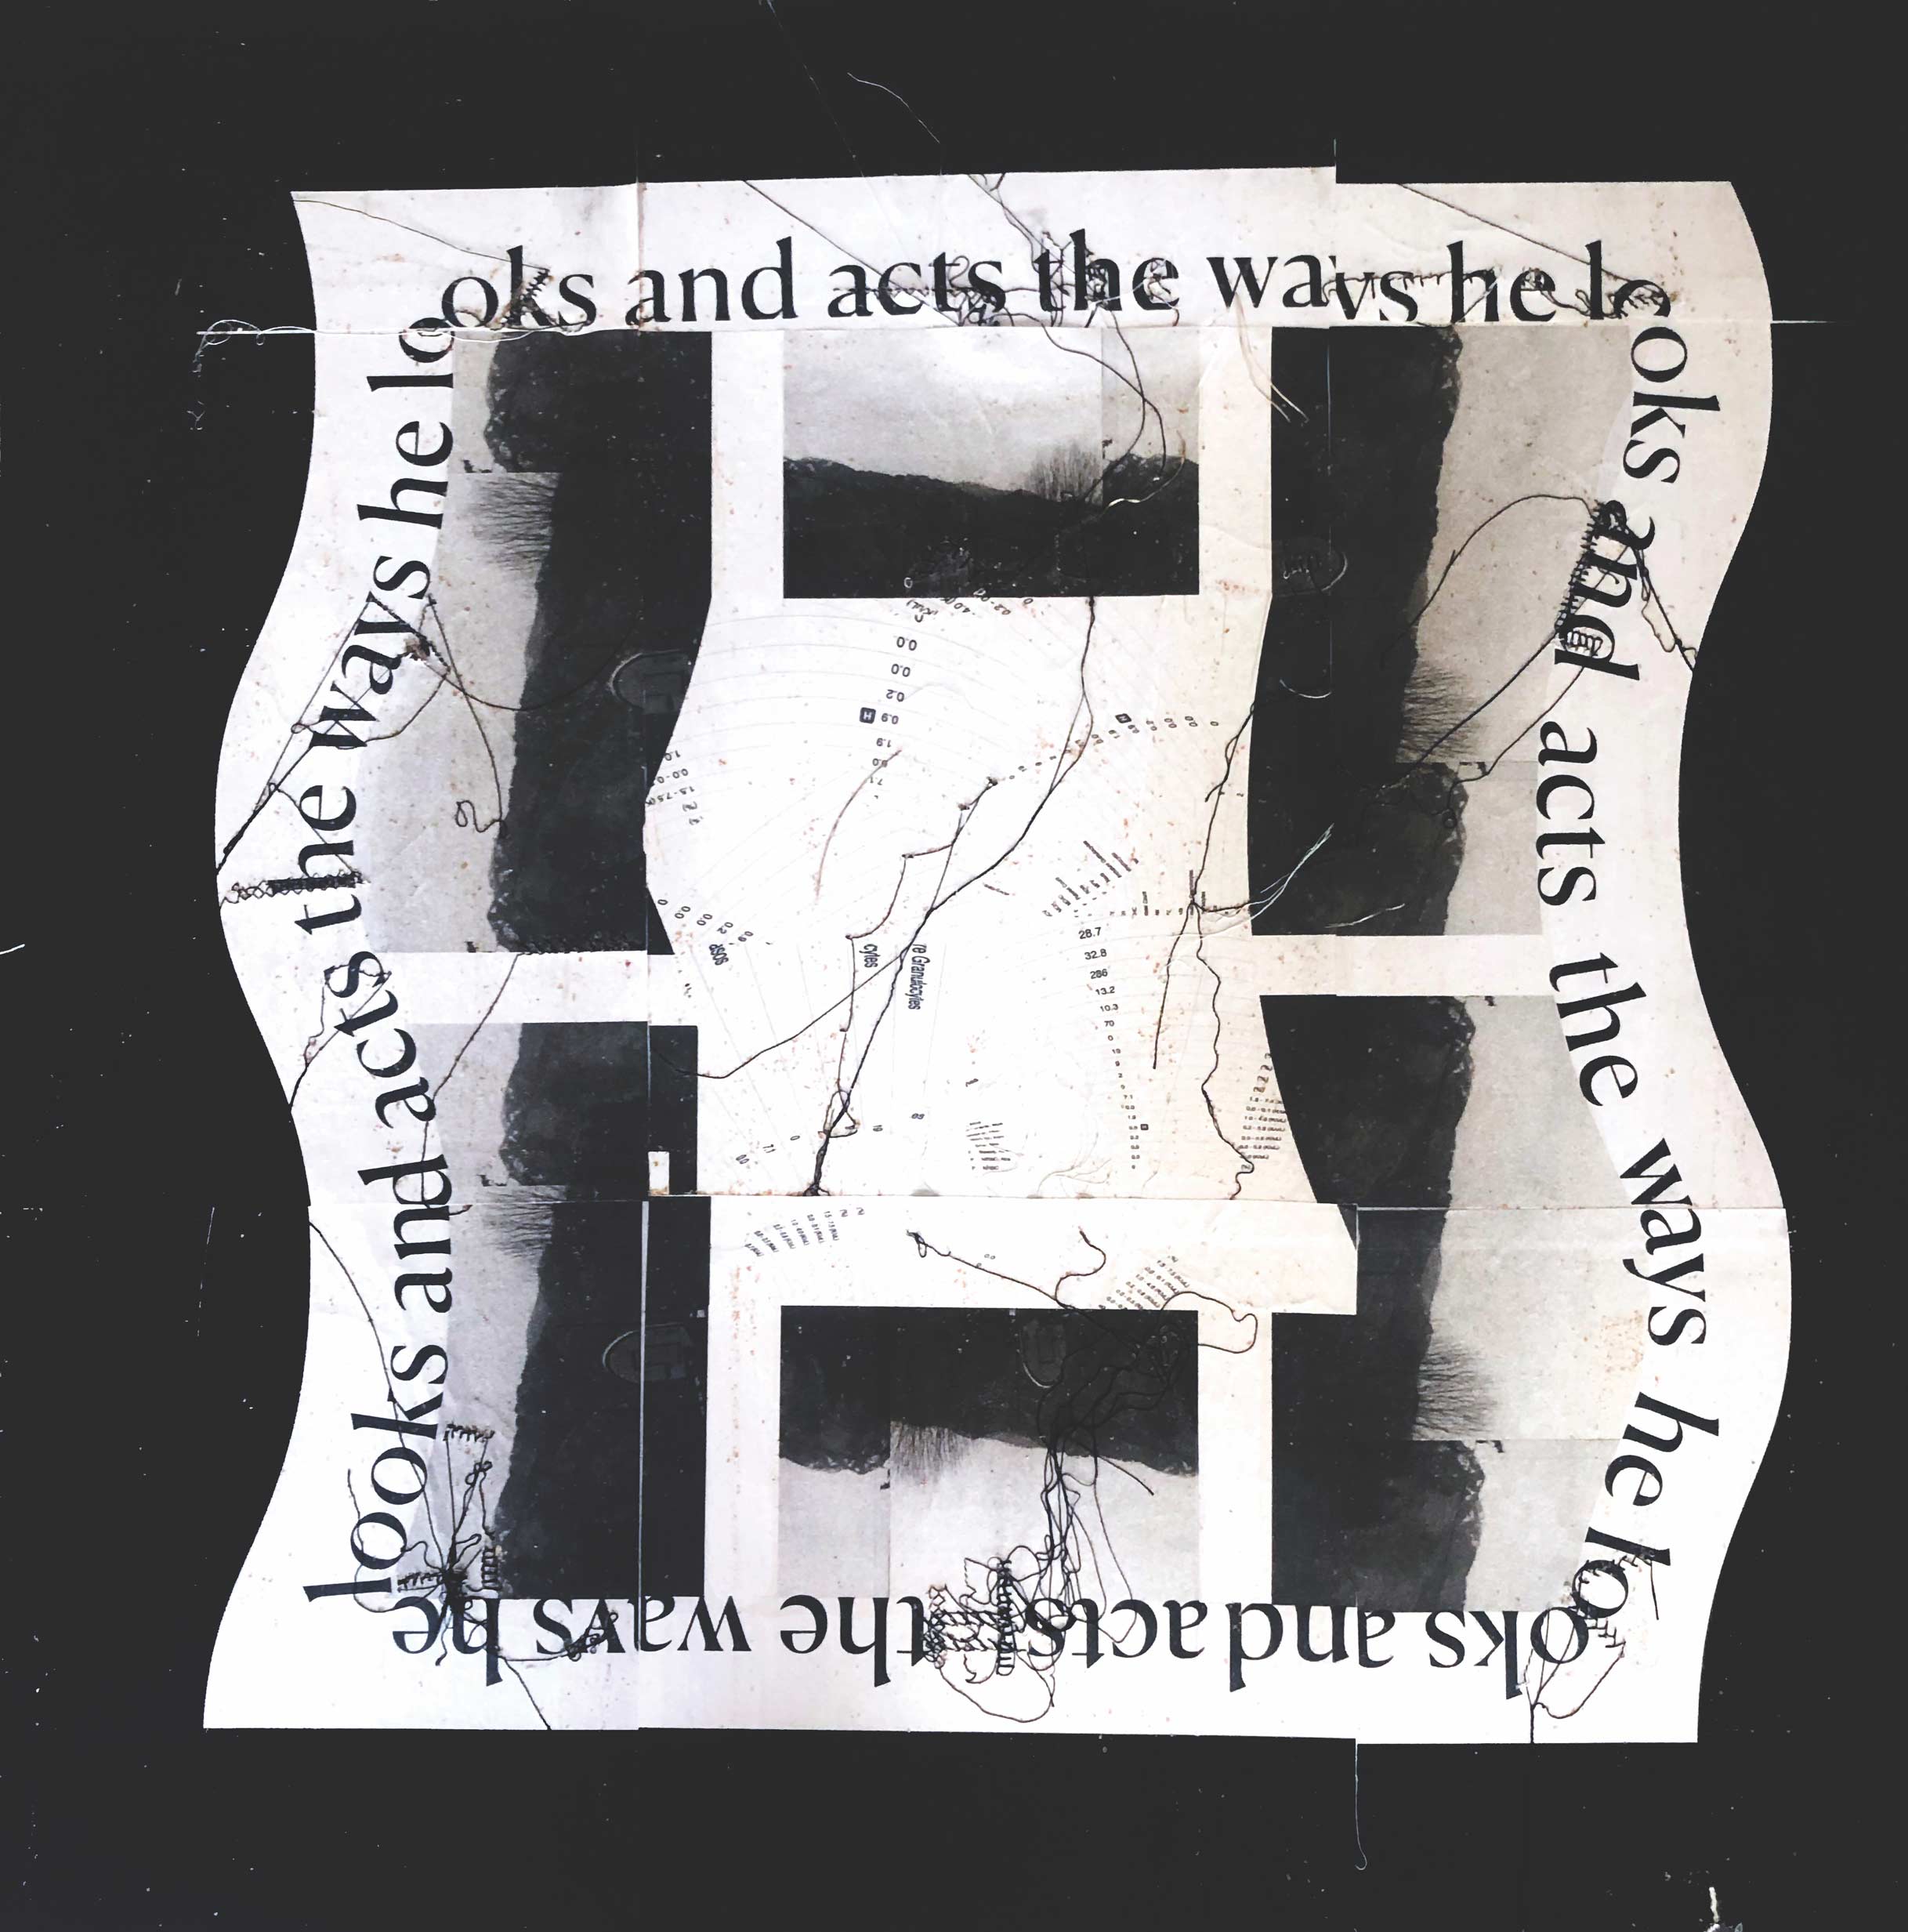 A black and white collaged mixed media work on a black background. A wavy, distorted square made up of several landscape photos and other ephemera. Text around the border reads "the way he looks and acts" repeated, but is cut up by the collage effect. Thread pierces the piece in several area creating an organic and random line work over the collaged imagery and text.